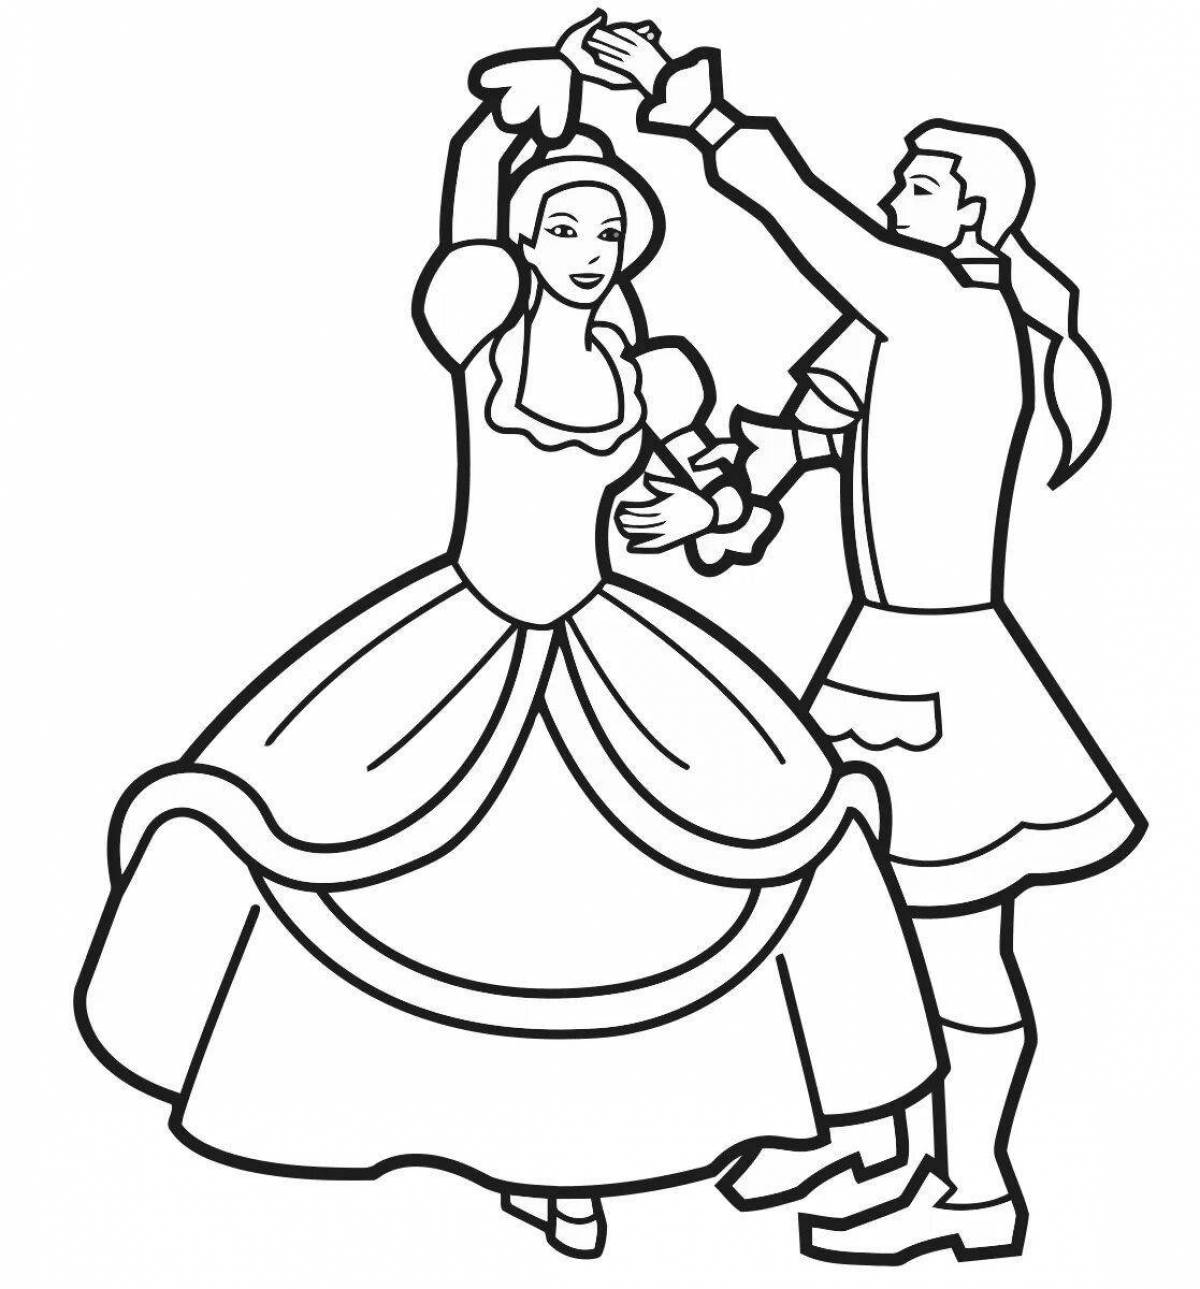 Coloring page shining dance